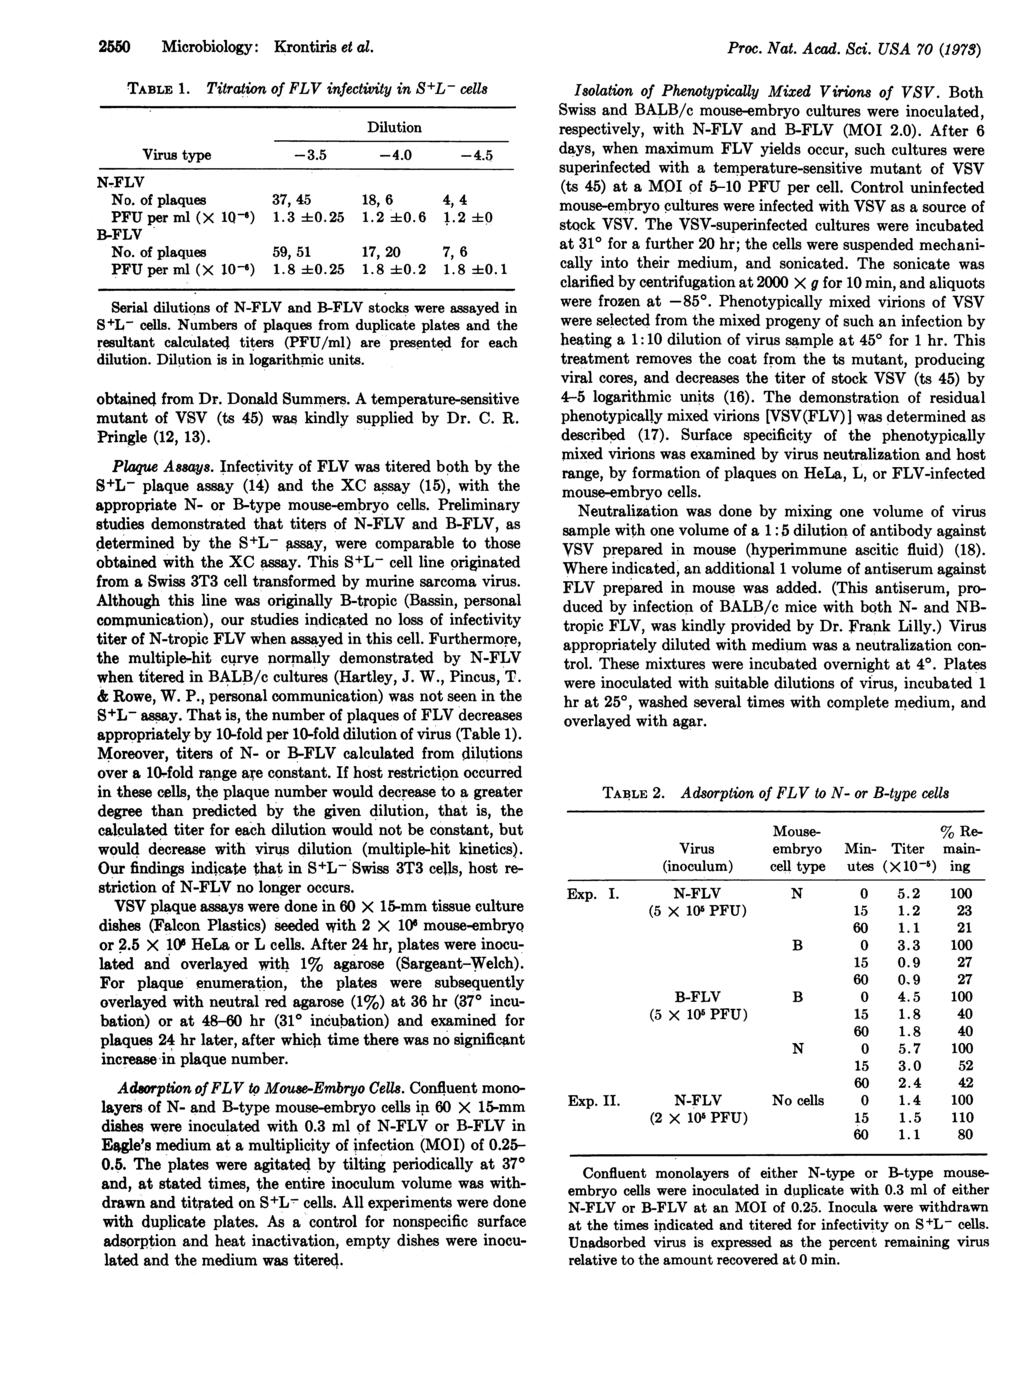 2550 Microbiology: Krontiris et al. TABLE 1. Titration of FLV infectivity in S+L- cells Dilution Virus type -3.5-4.0-4.5 N-FLV No. of plaques 37, 45 18, 6 4, 4 PFU per ml (X 1Q-6) 1.3 ±0. 25 1.2 40.